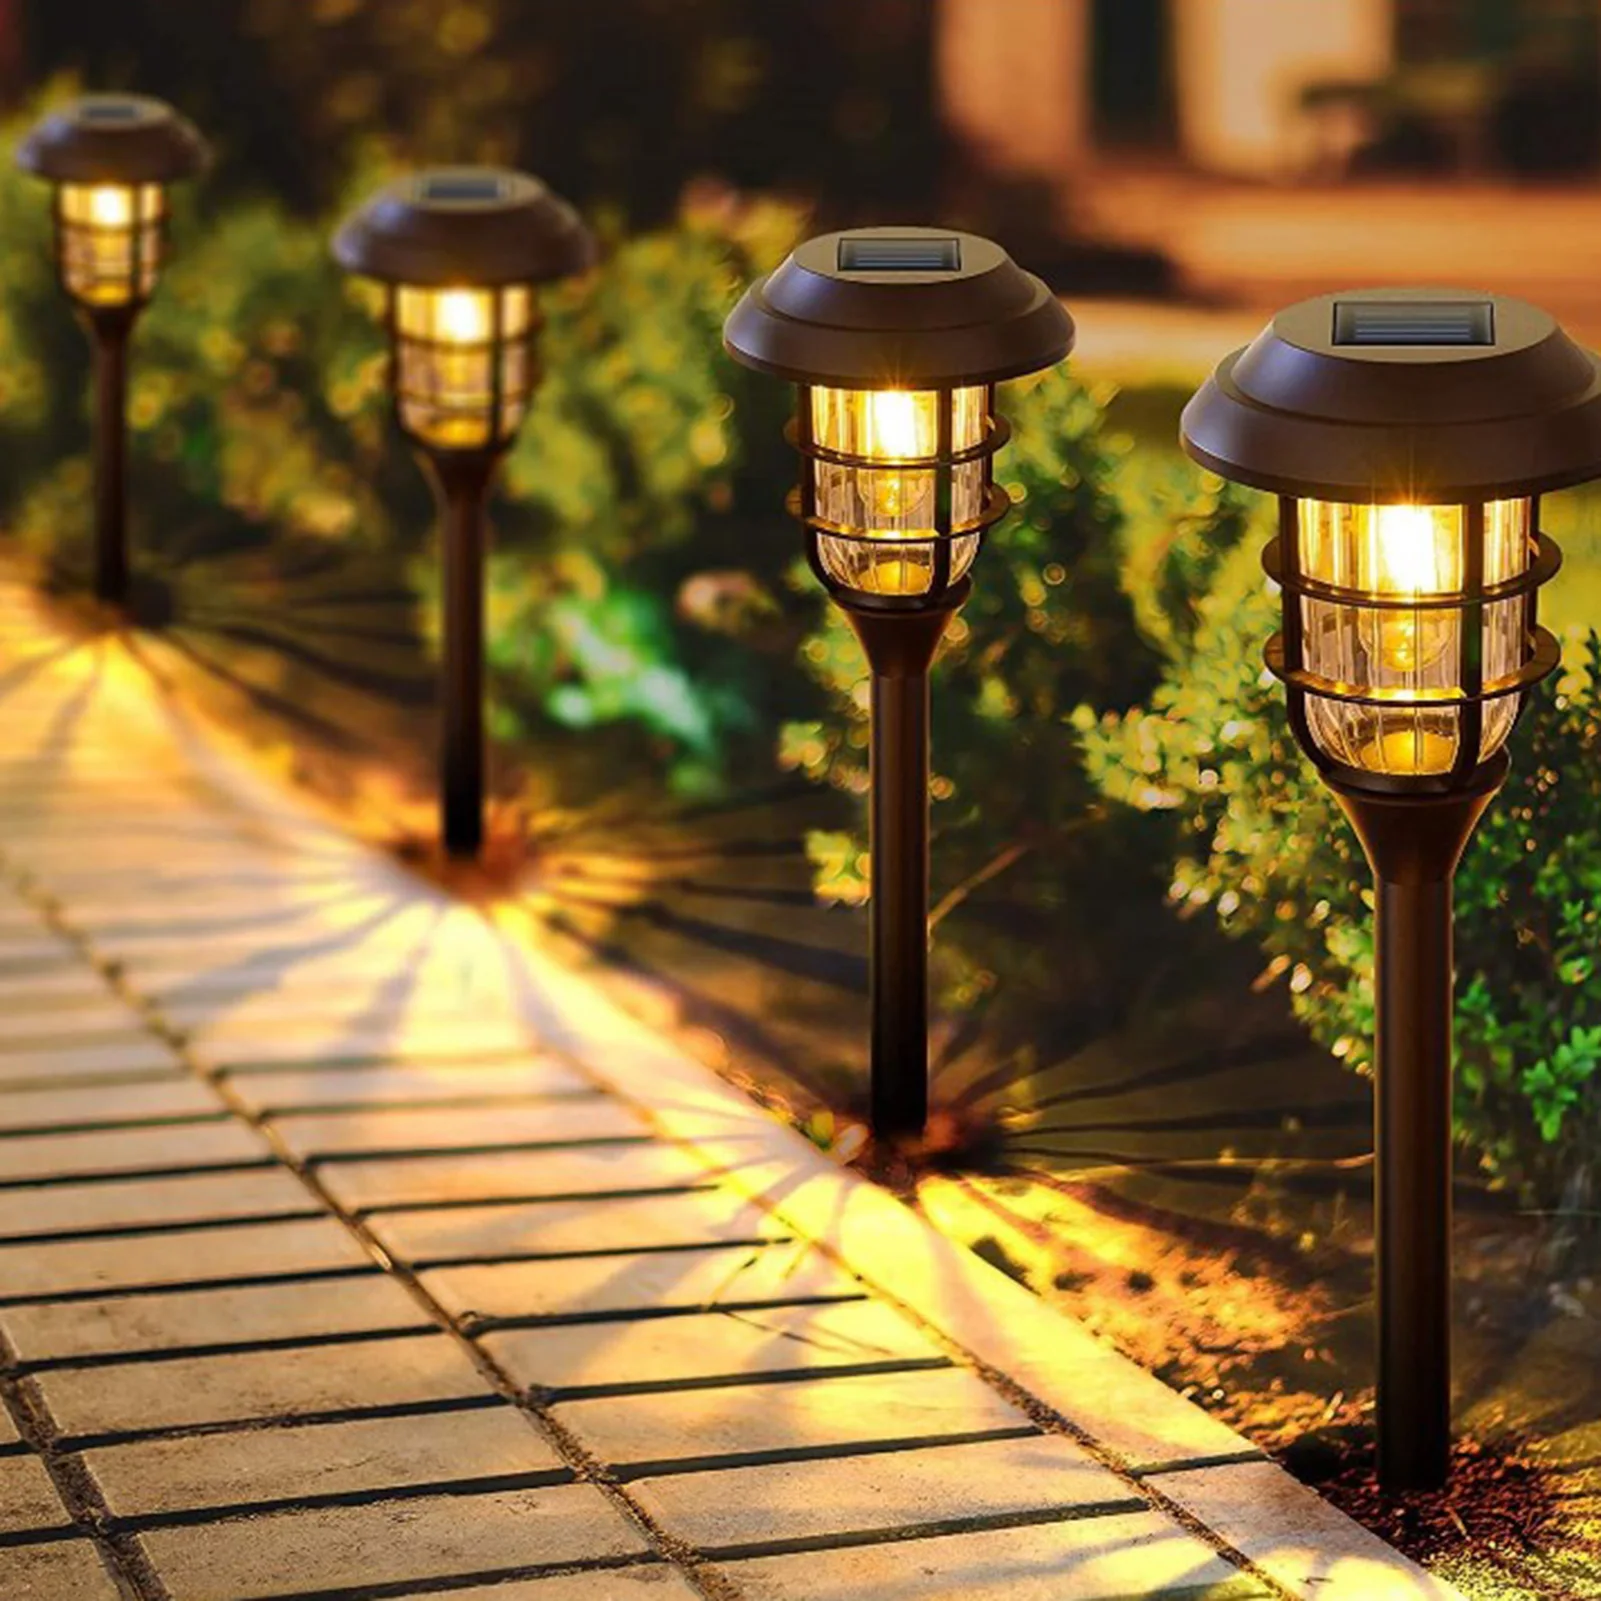 2Pcs Solar Outdoor Lights Color Changing Solar Garden Lights Waterproof Auto On/Off Solar Landscape Lamp for Yard Patio Pathway new arrival rgb white gx53 led bulb 9w 220v ac gx53 downlight for ceiling cabinet wall lamp color changing lighting decorated